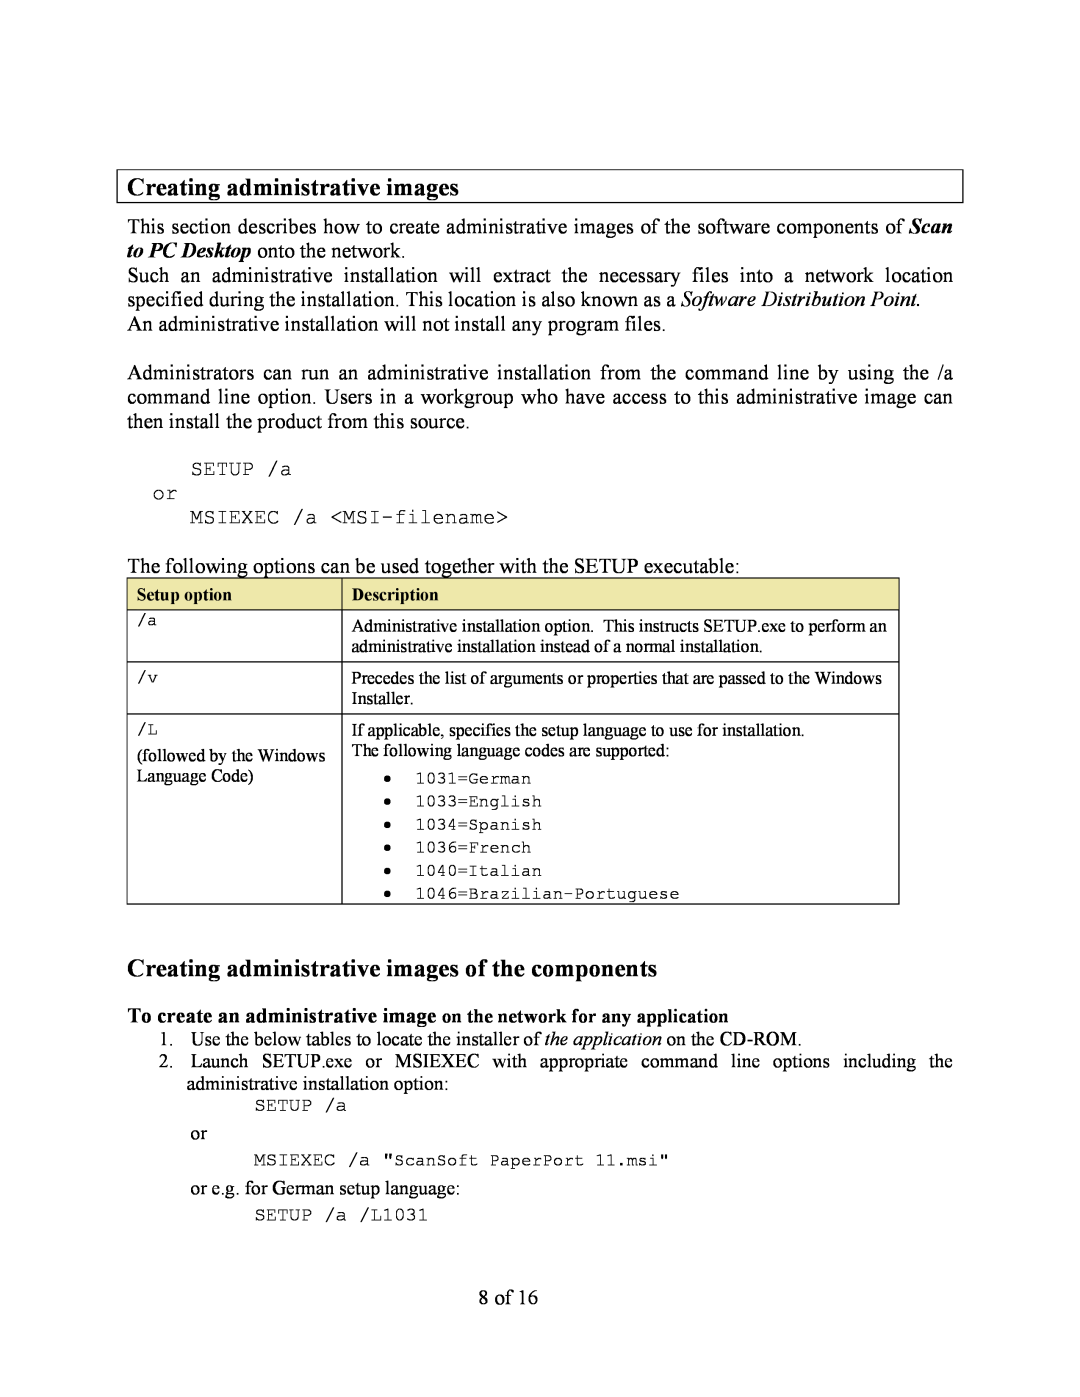 Xerox V9.0 manual Creating administrative images of the components 